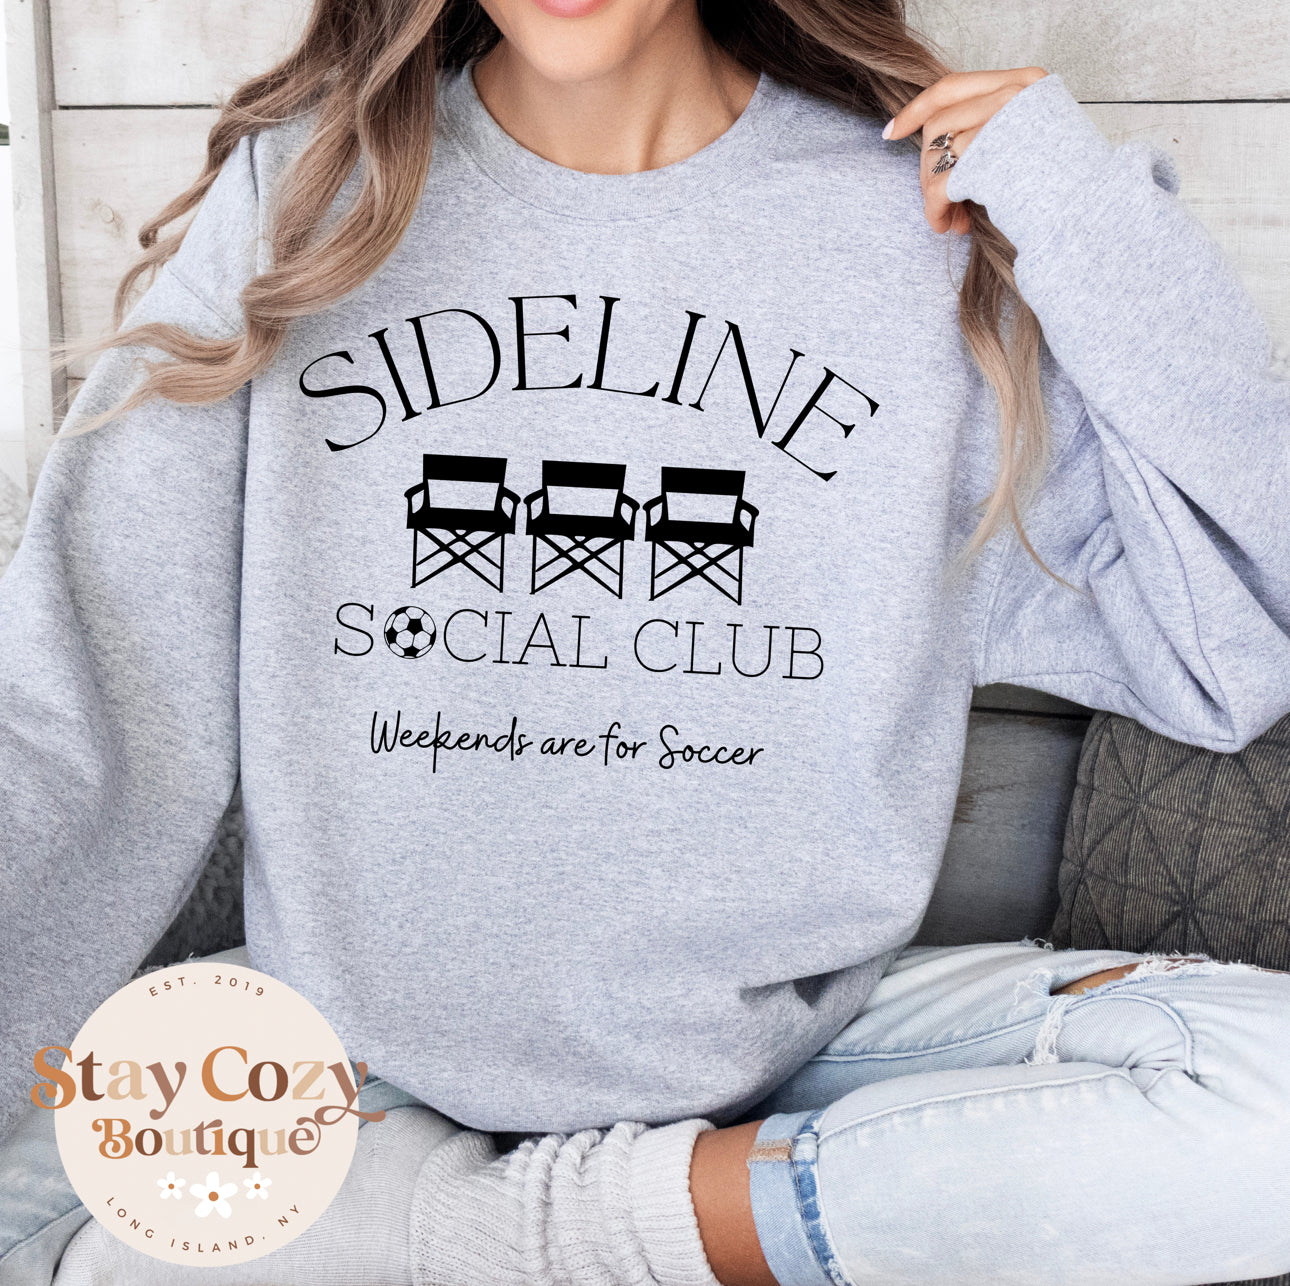 Sideline Social Club Weekends are for Soccer Sweatshirt, Soccer Sweatshirt, Soccer Crewneck, Weekends are for Soccer Sweatshirt